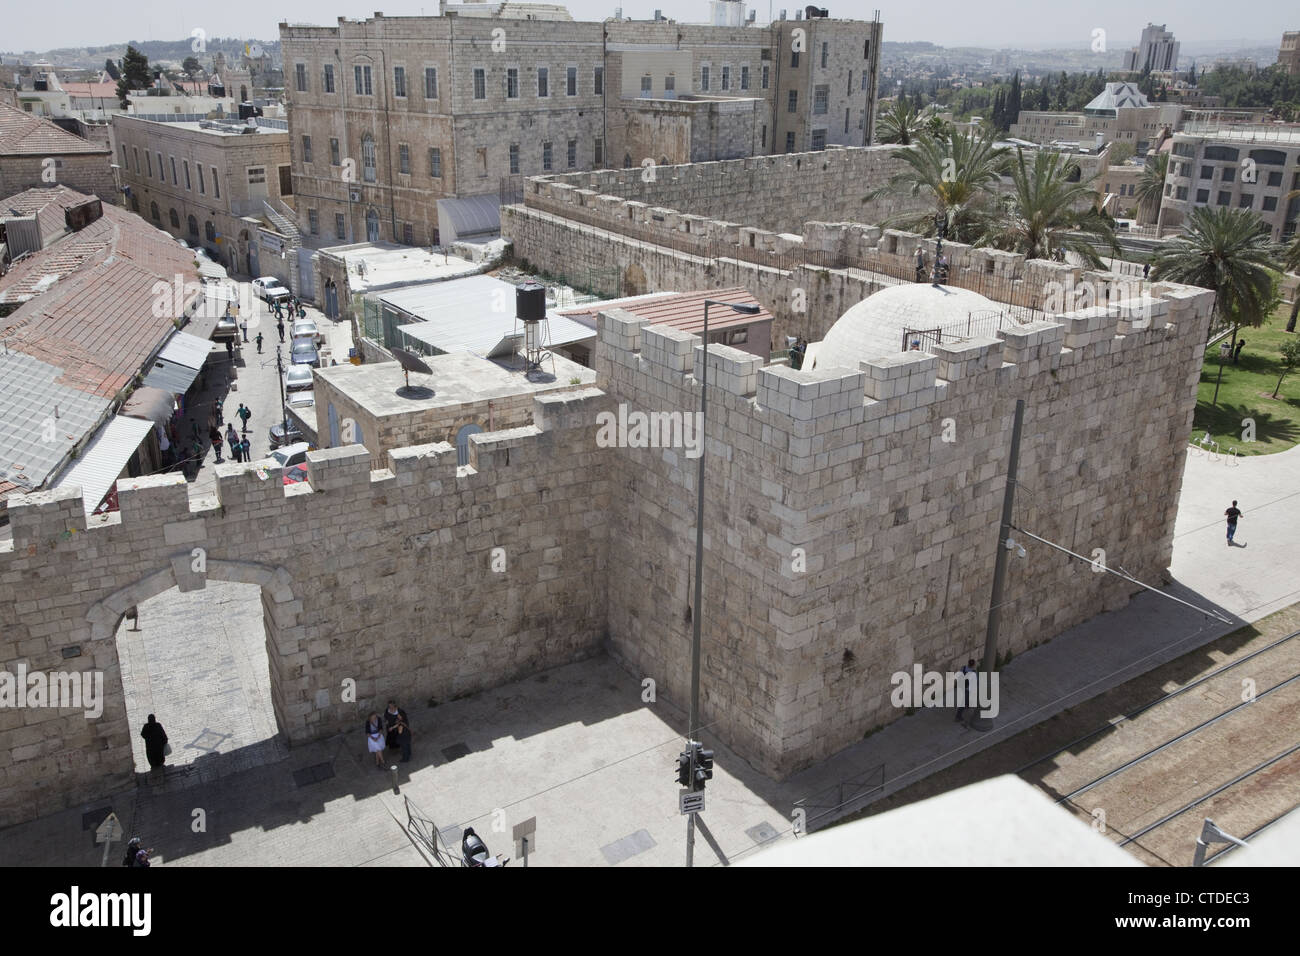 The New Gate entrance (1889) into the Christian Quarter of the walled Old City of Jerusalem, Israel Stock Photo